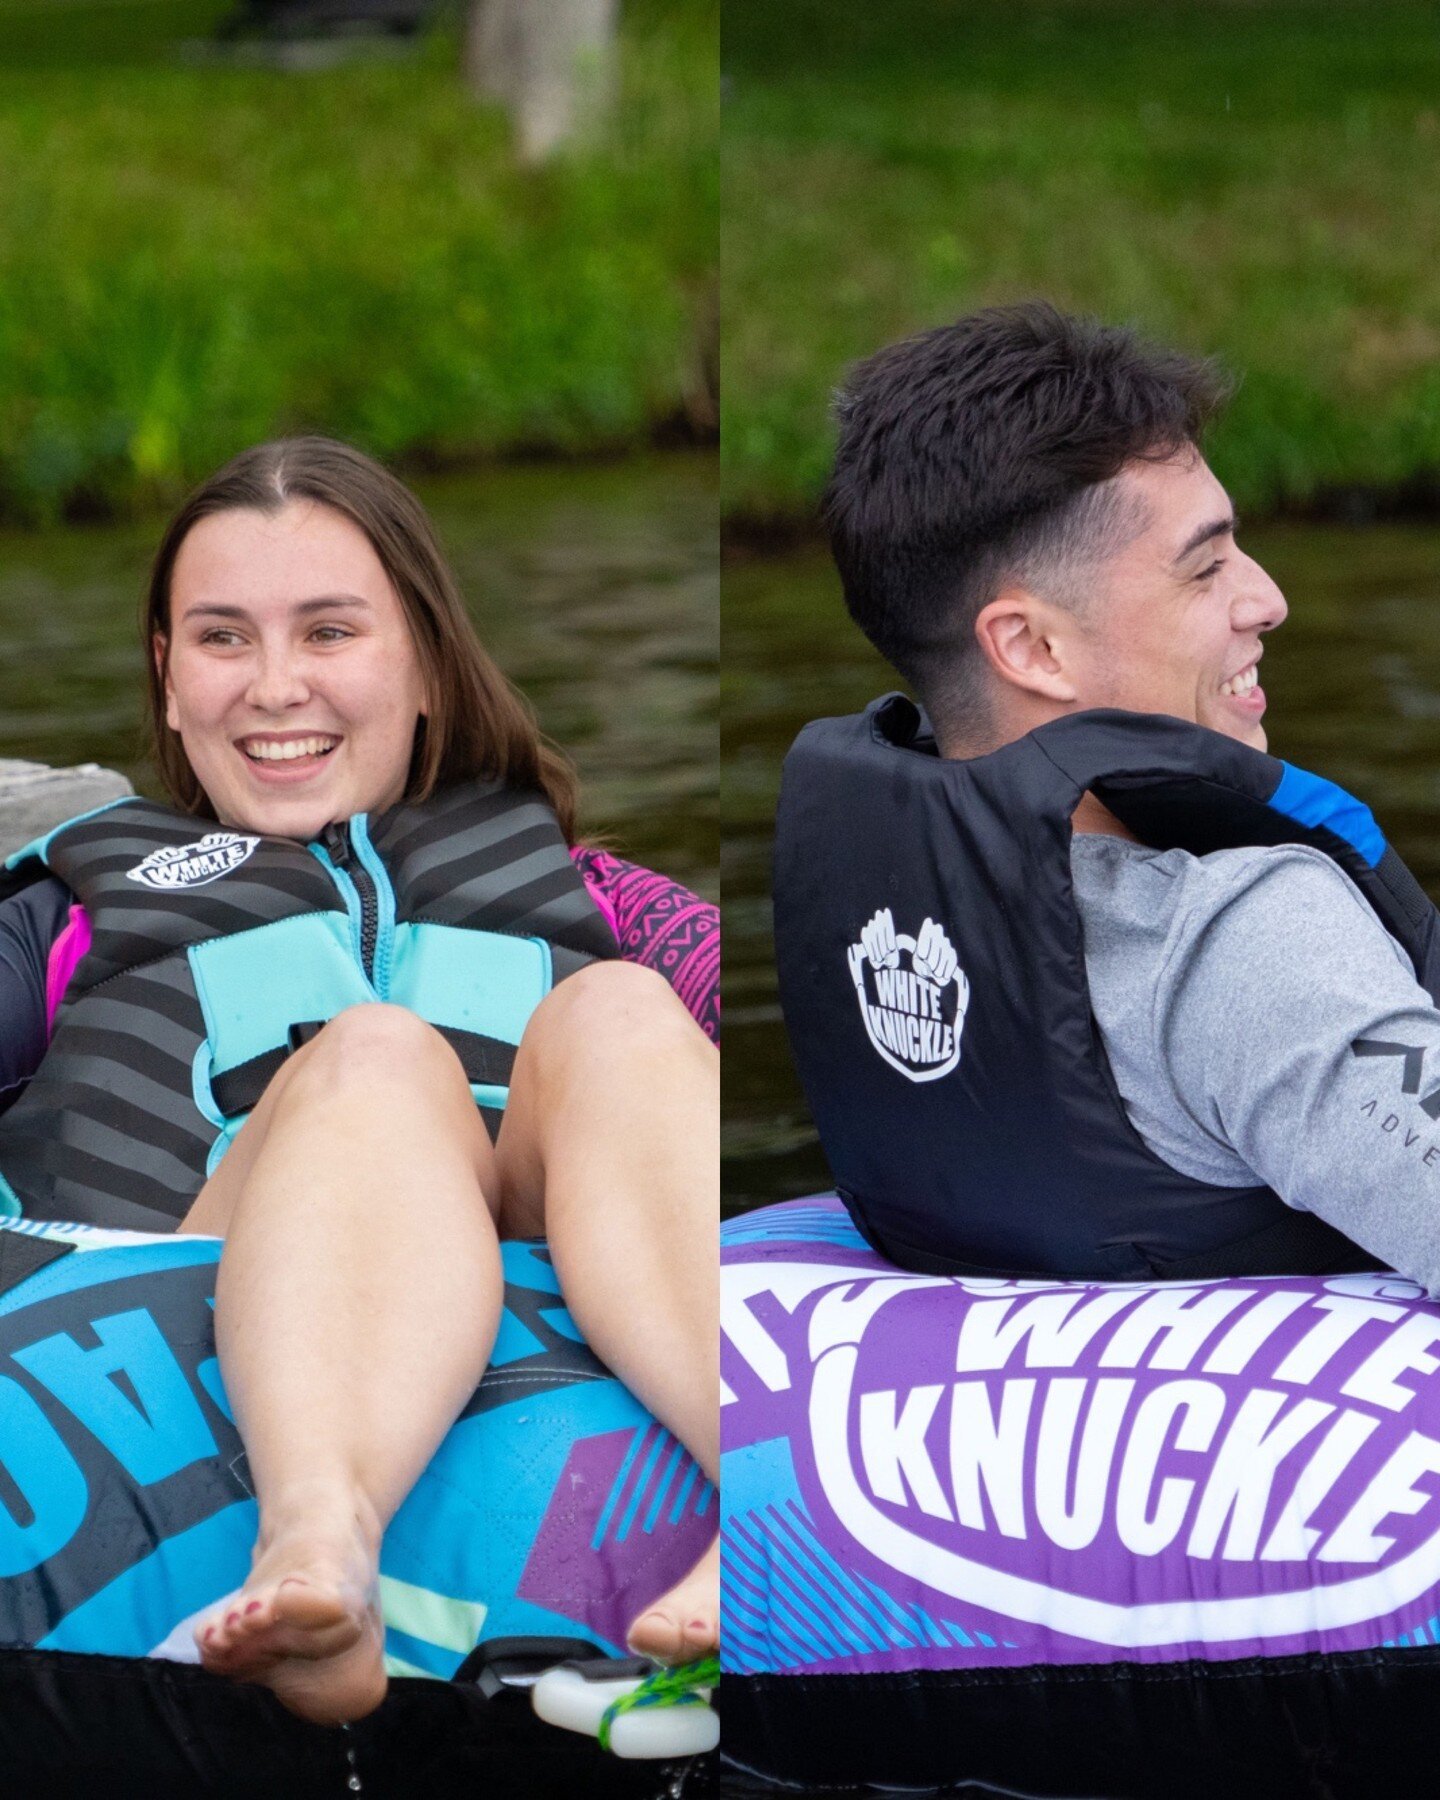 It's all fun and games until the boat starts moving... 🤣🌊

The Crash Pack is loads of fun, but it sure ain't friendly!

#WhiteKnuckle #watersports #summer #cottage #fun #waterski #towables #tubing #wakesurf #wakeboard #kneeboard #recreation #WhiteK